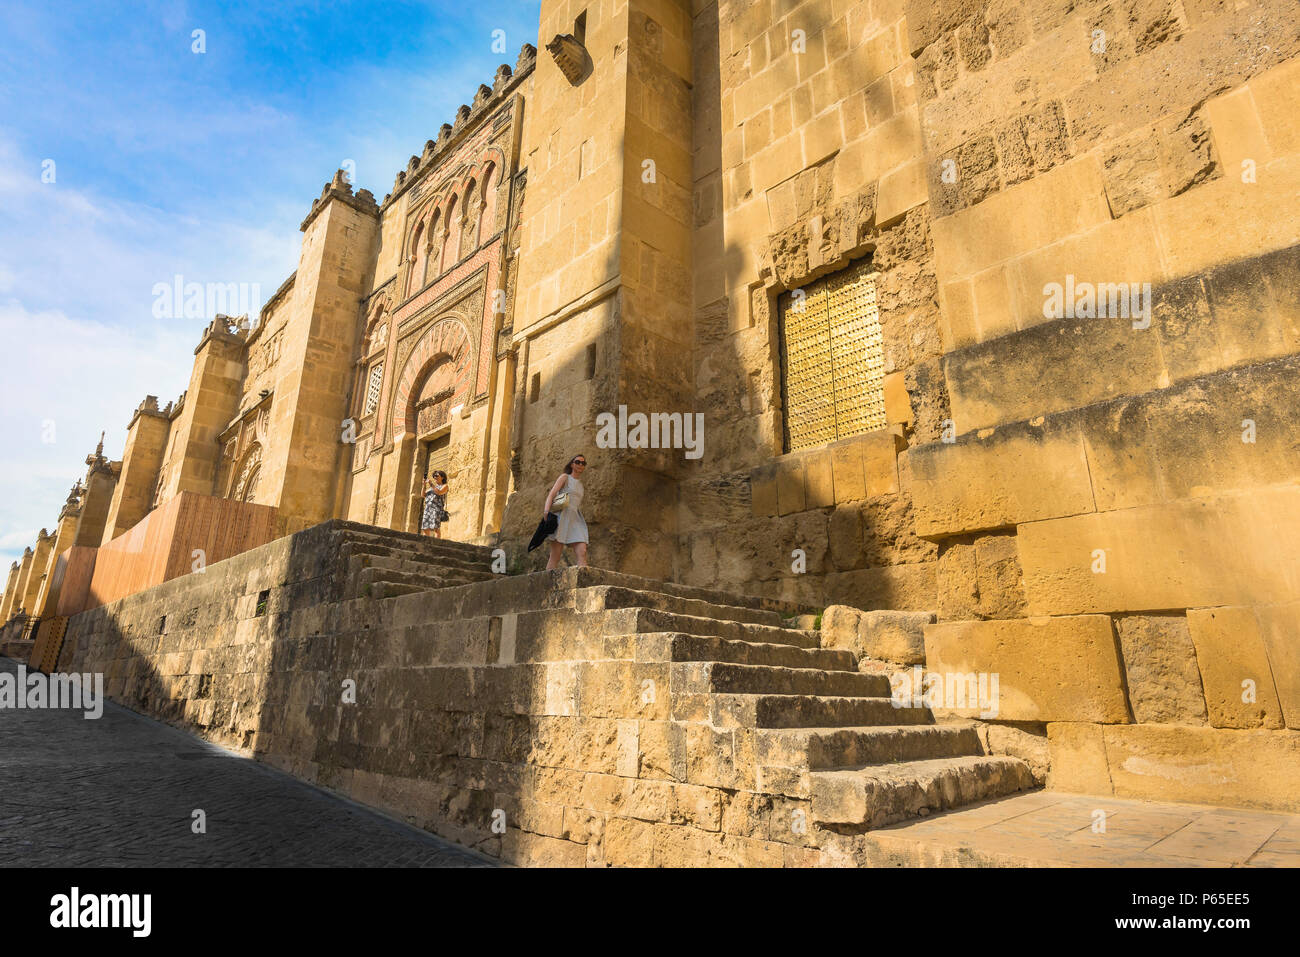 Spain Andalucia travel, a young woman descends steps alongside the west wall of the great Cathedral Mosque (La Mezquita) in Cordoba, Andalucia, Spain. Stock Photo